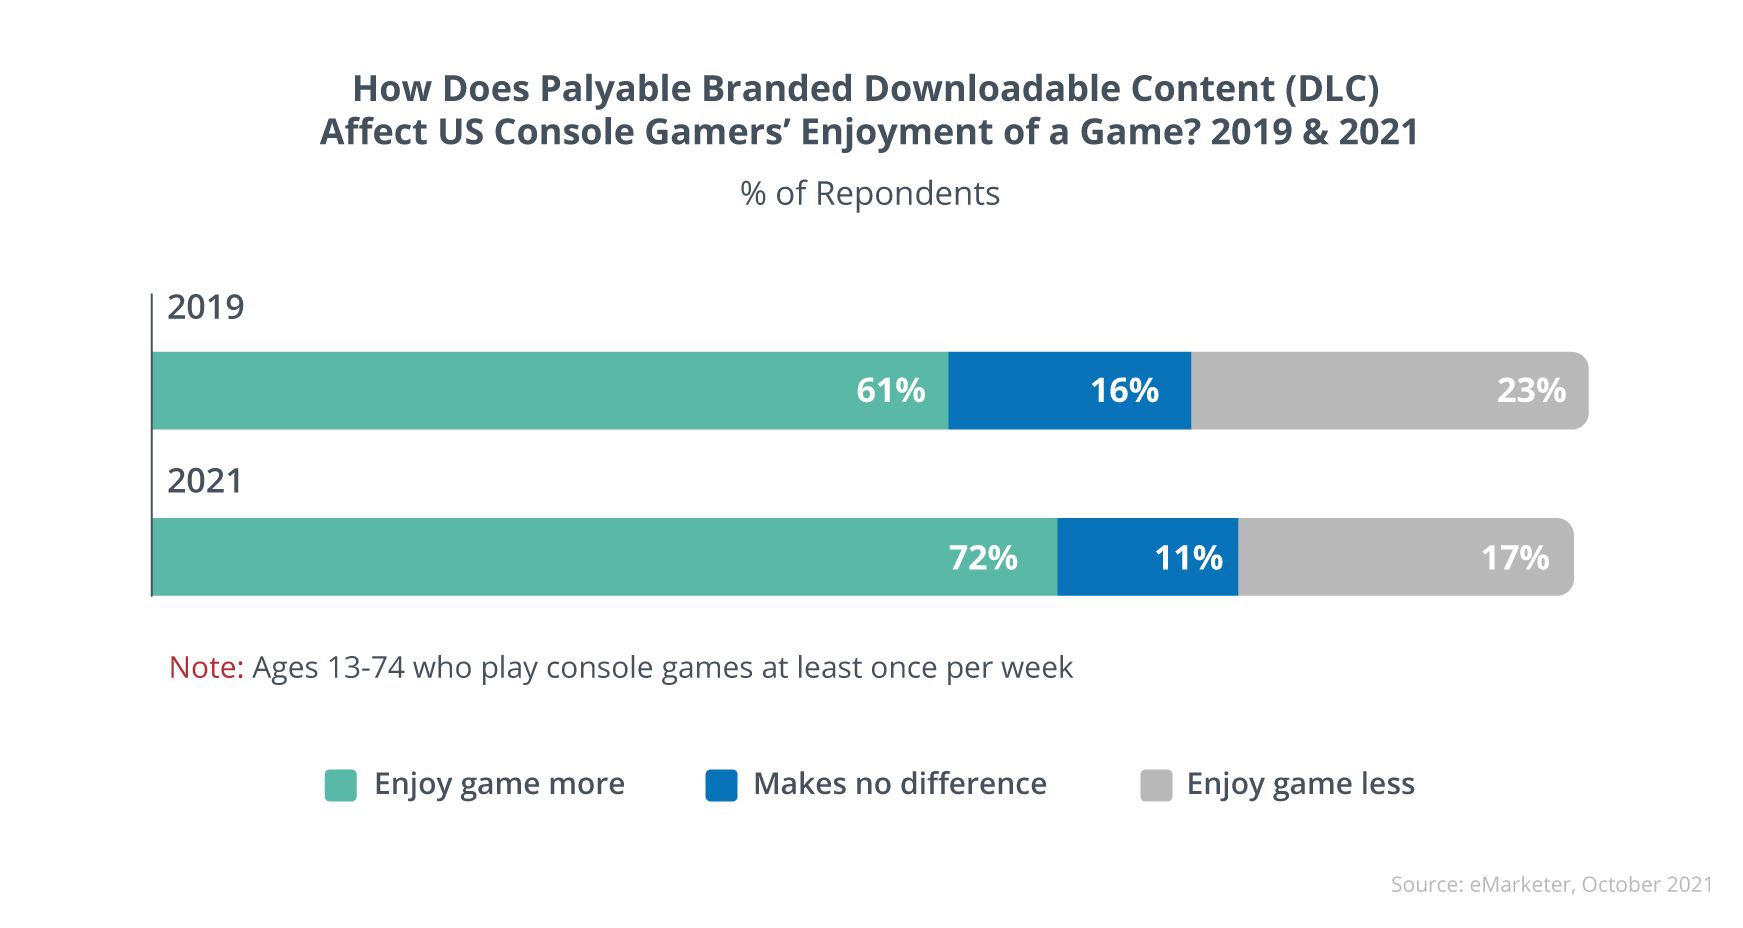 How Does Palyable Branded Downloadable Content (DLC) 
Affect US Console Gamers’ Enjoyment of a Game?